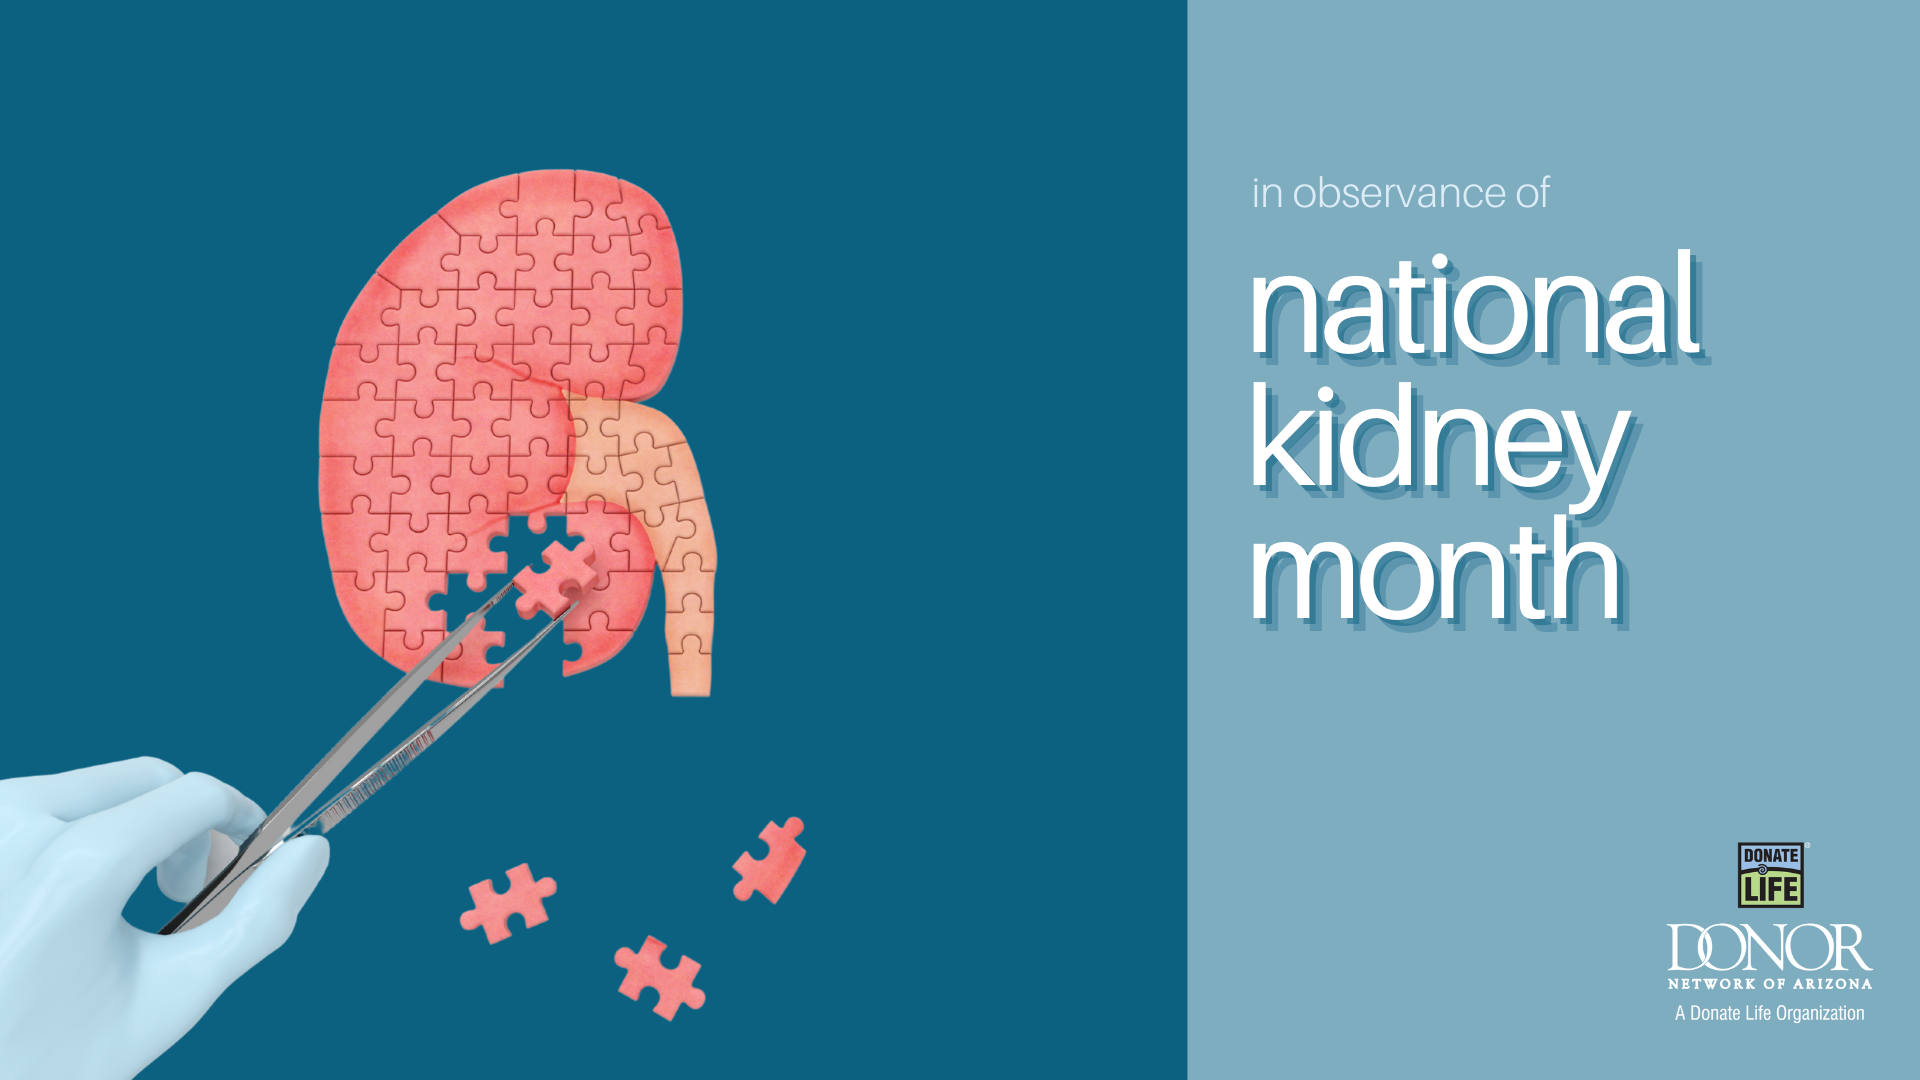 What does a kidney do anyway? Learn about this vital organ for National